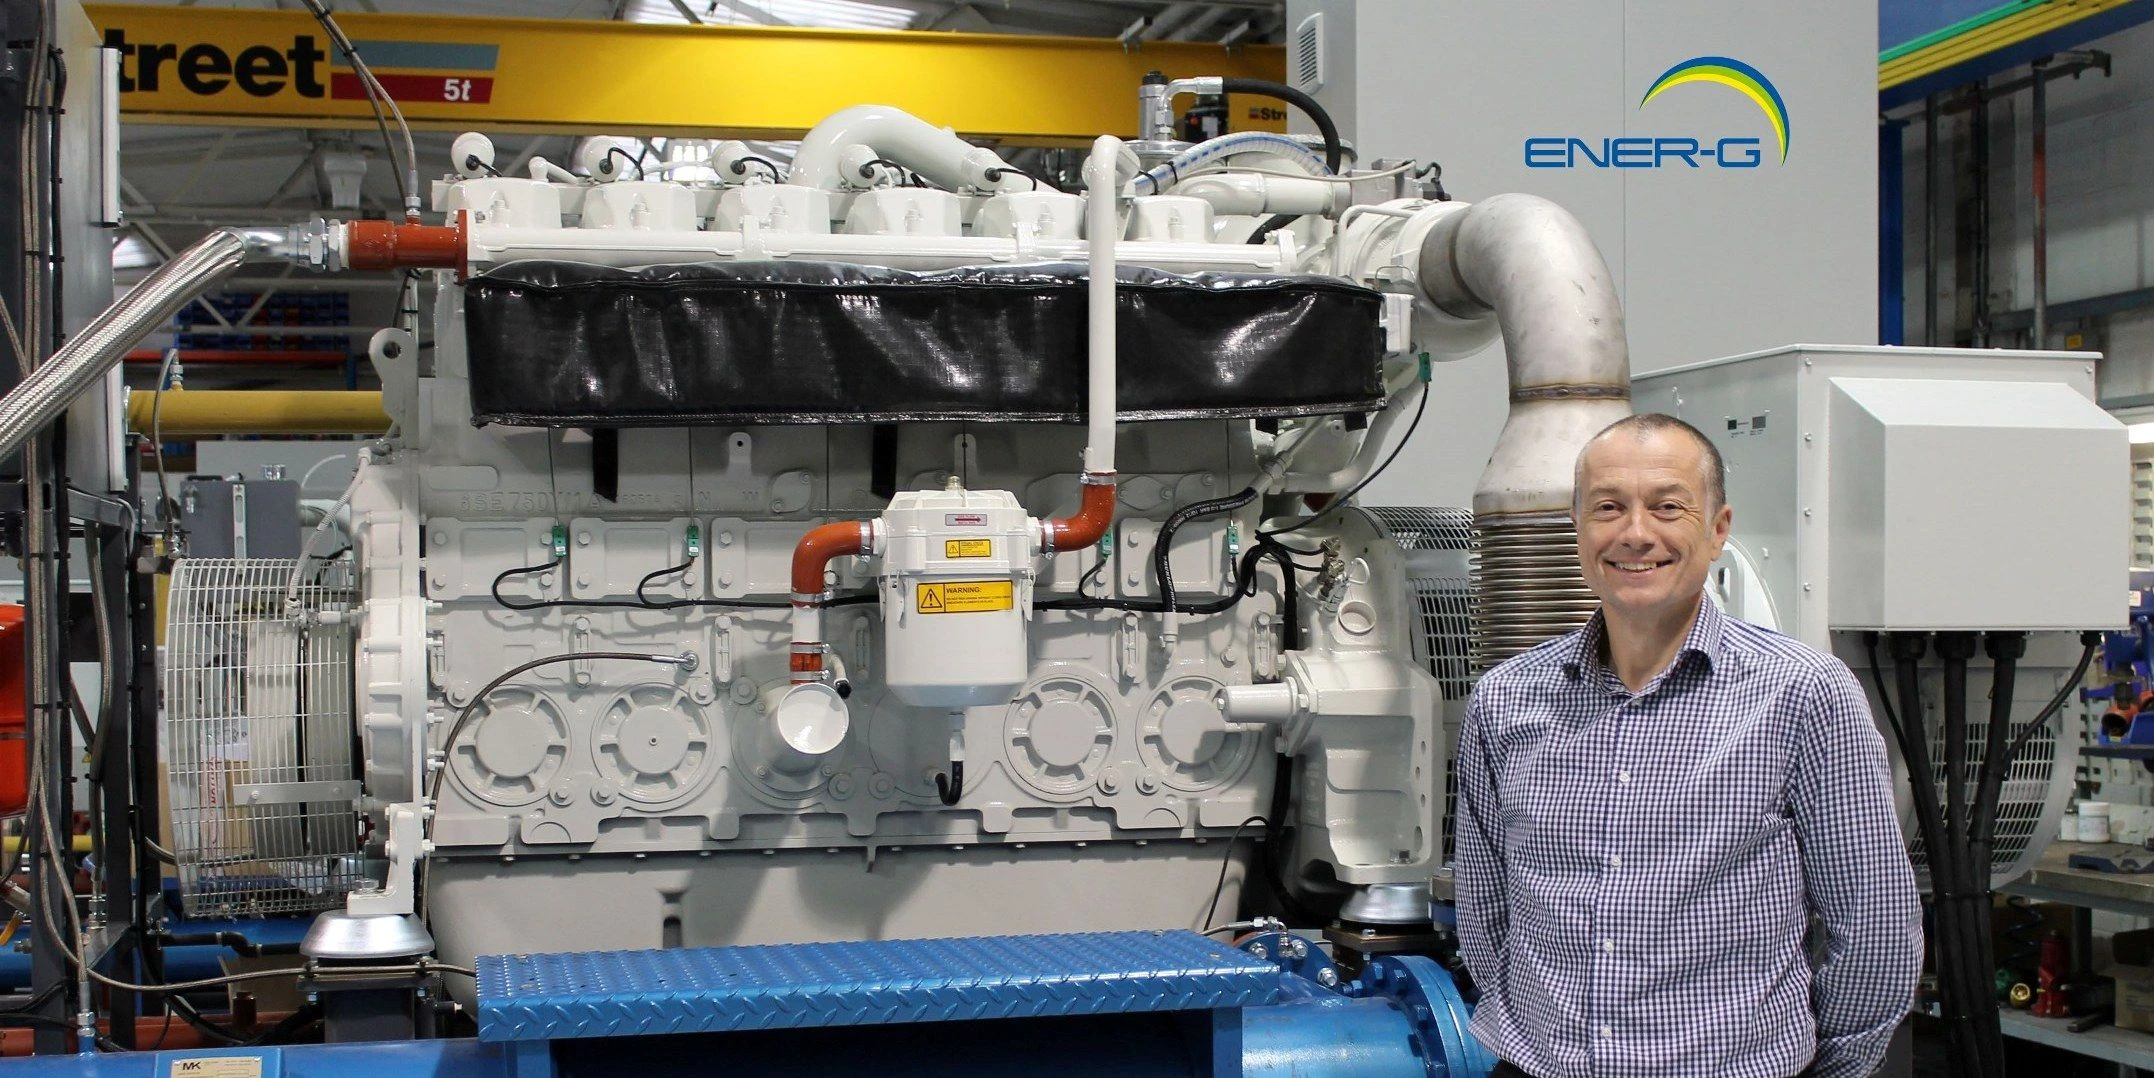 Chris Marsland, Technical Director of ENER-G Combined Power Ltd, with ENER-G CHP system 